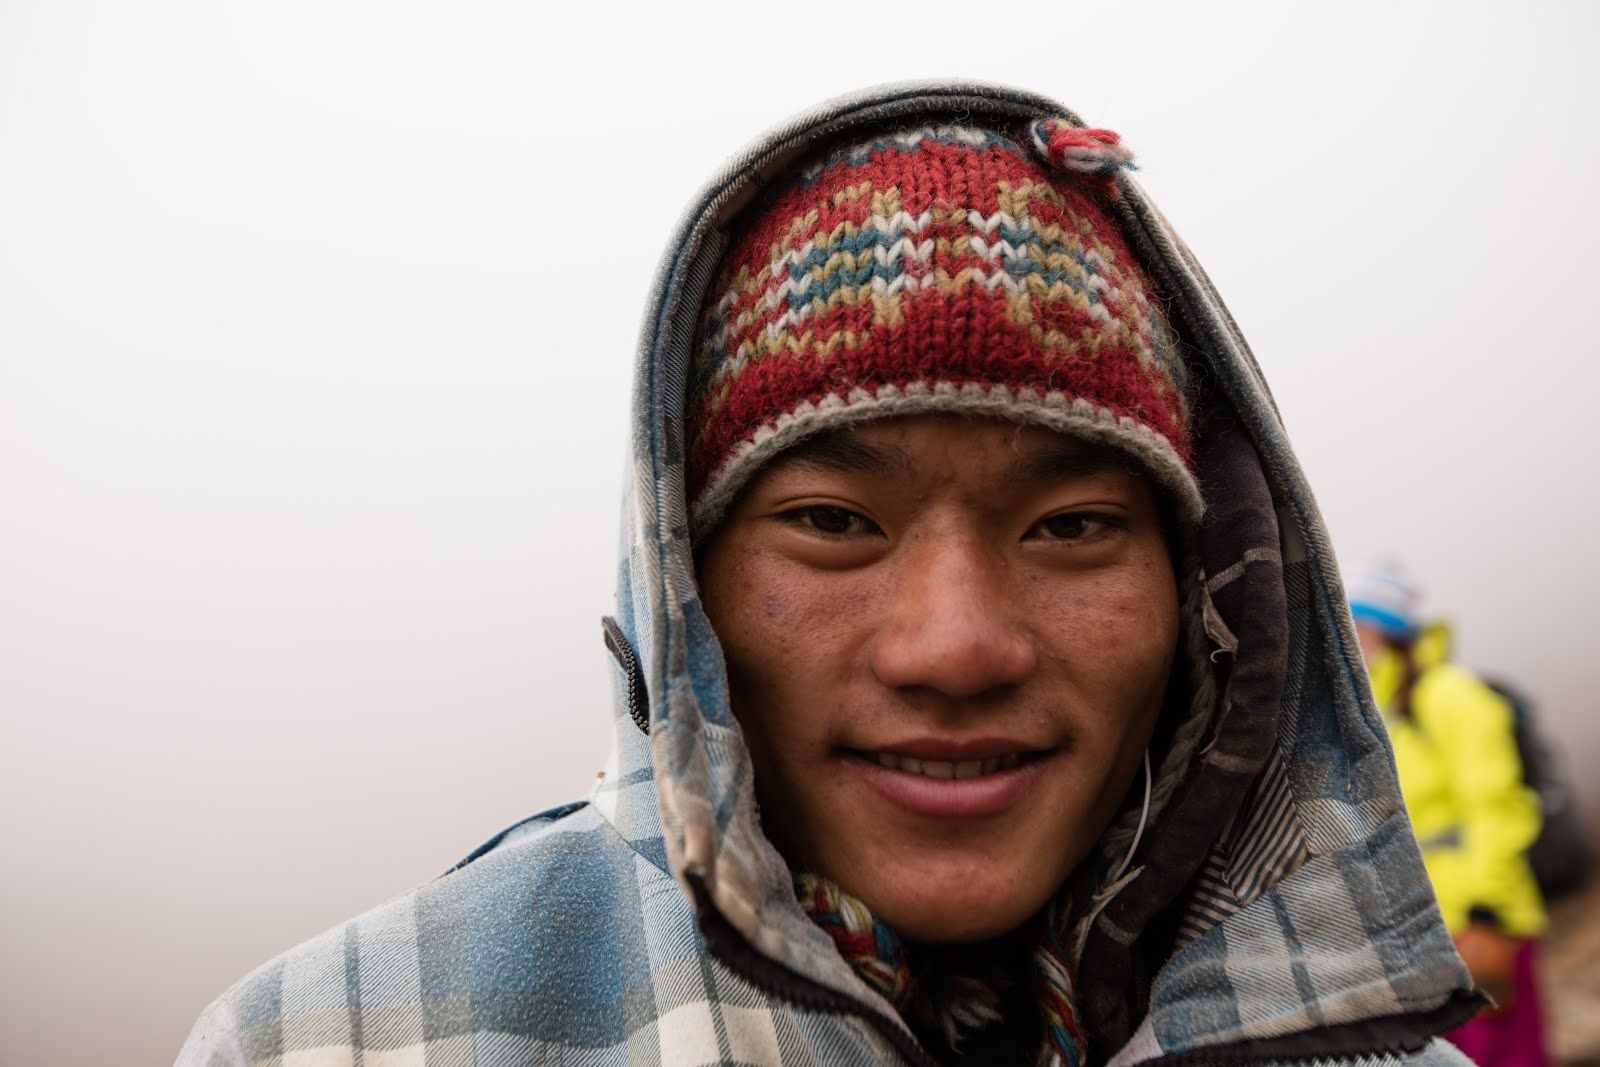 Yoman Rai - Porter. Jokester amongst the porters, but didn't engage with us directly much.